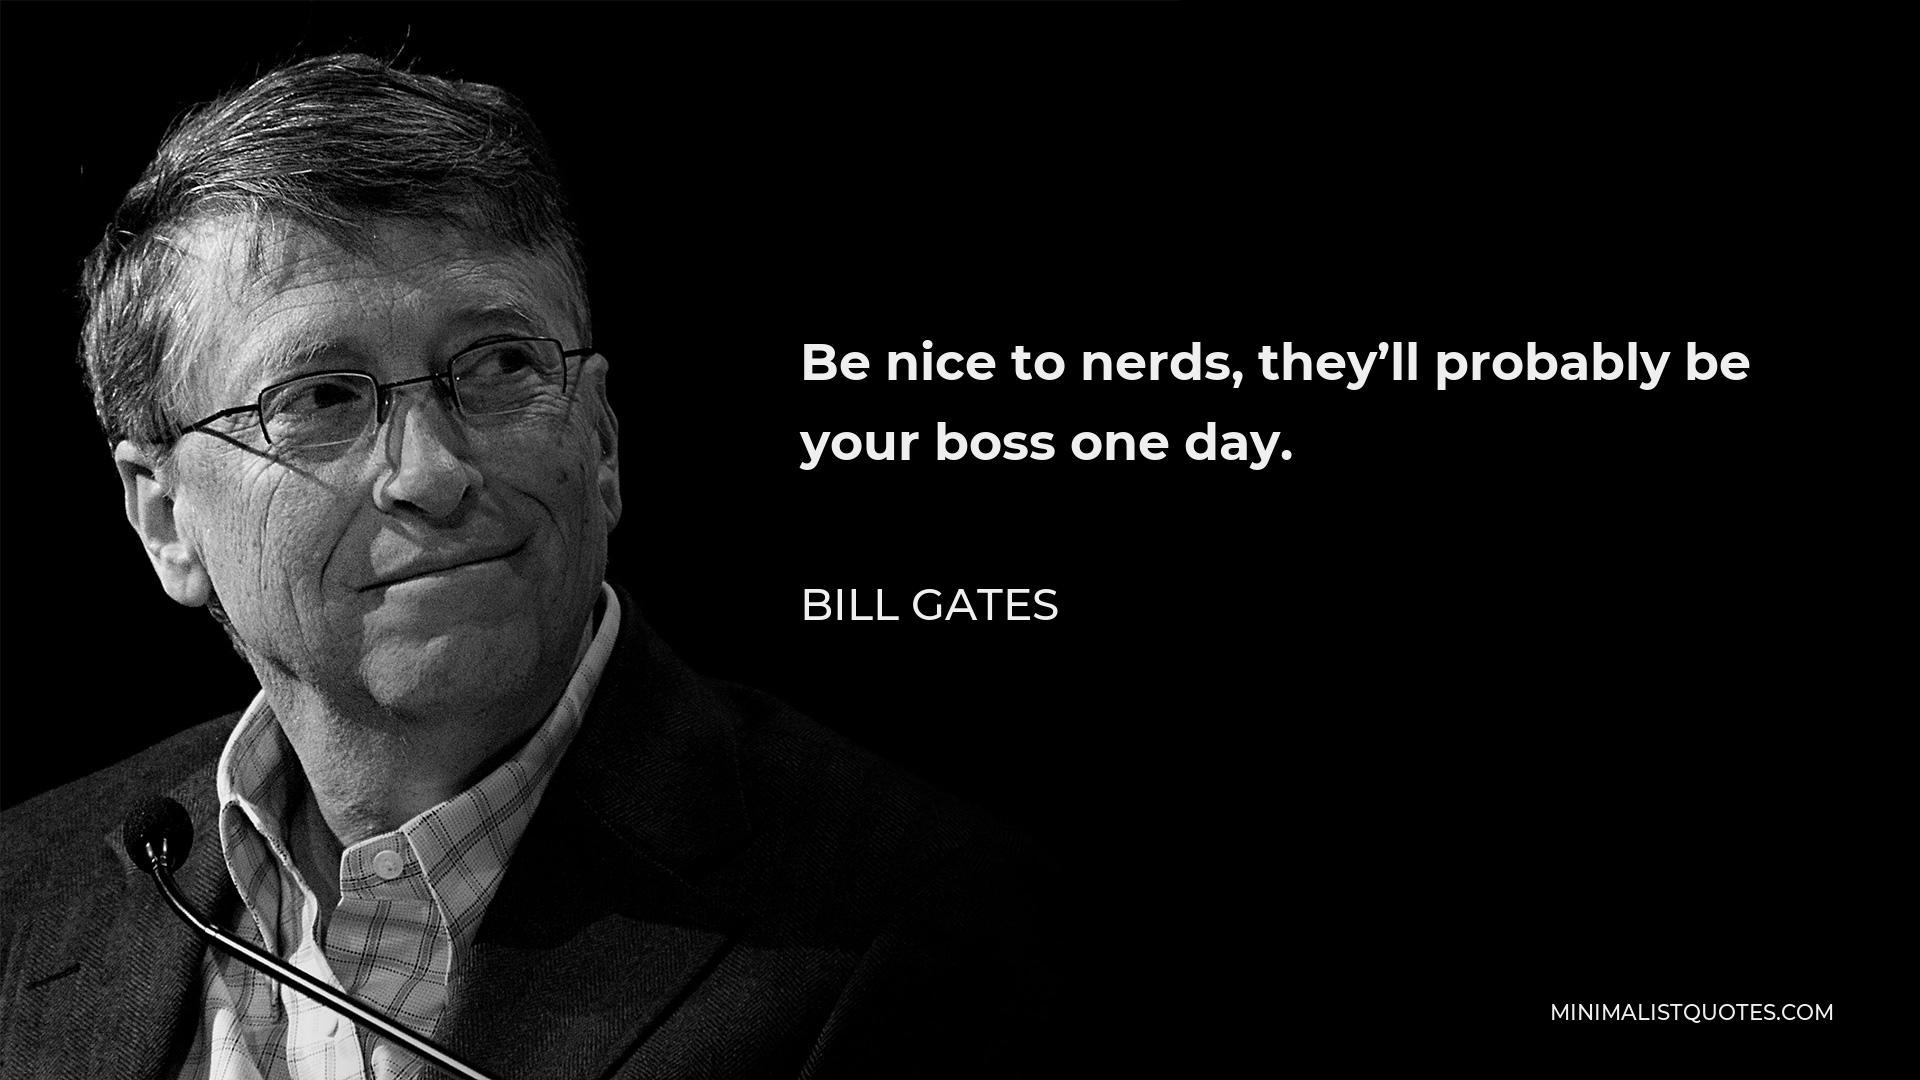 Bill Gates Quote - Be nice to nerds, they’ll probably be your boss one day.